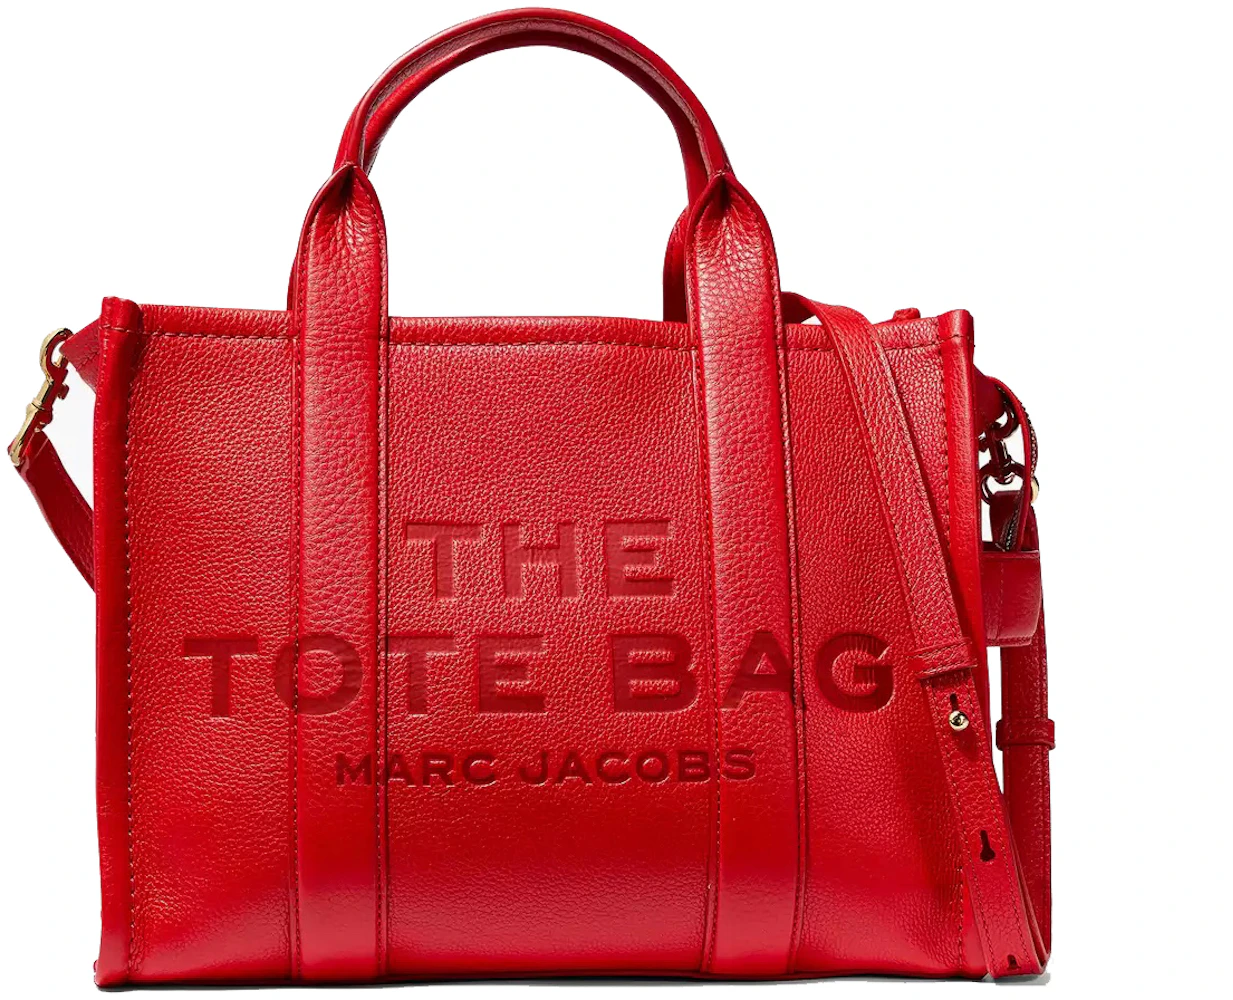 Marc Jacobs The Leather Tote Bag Medium True Red in Grain Leather with ...